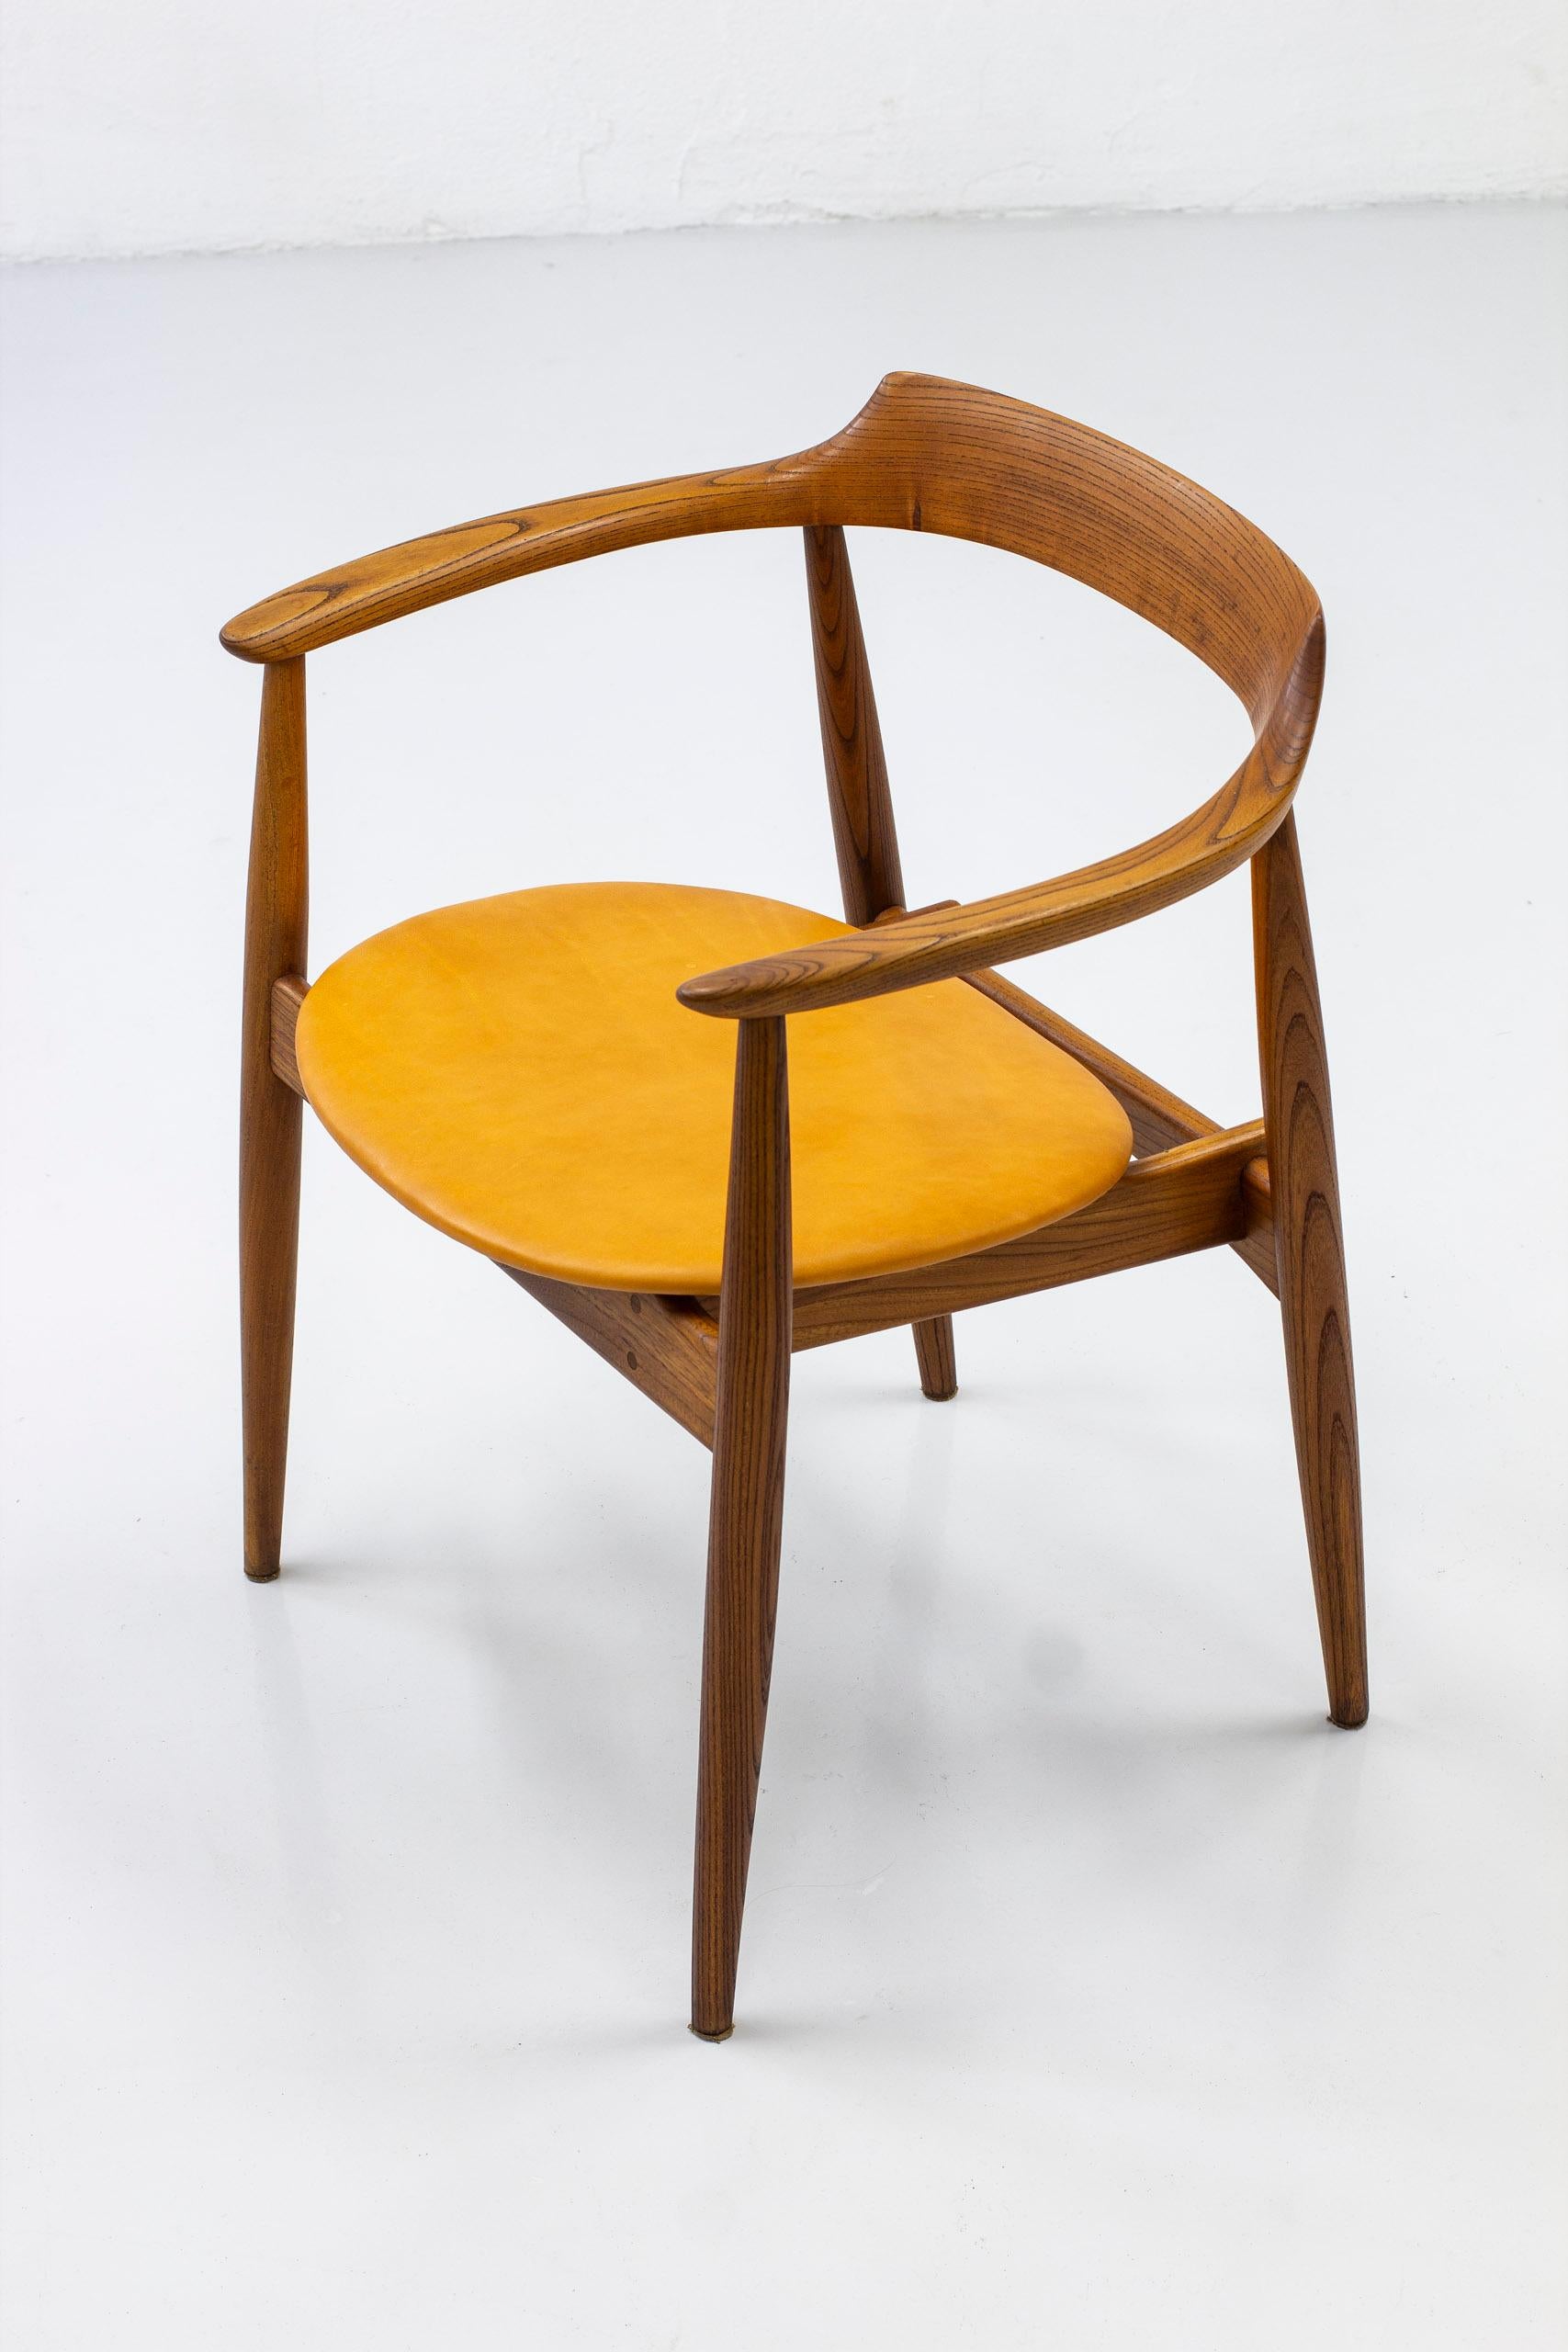 Arm chair model St-750 designed by Arne Wahl Iversen. Produced in Denmark by Danish cabinetmaker during the 1960s. Made from solid elm wood with oil finish. New upholstery in vegetable tanned leather in a cognac color. Very good vintage condition